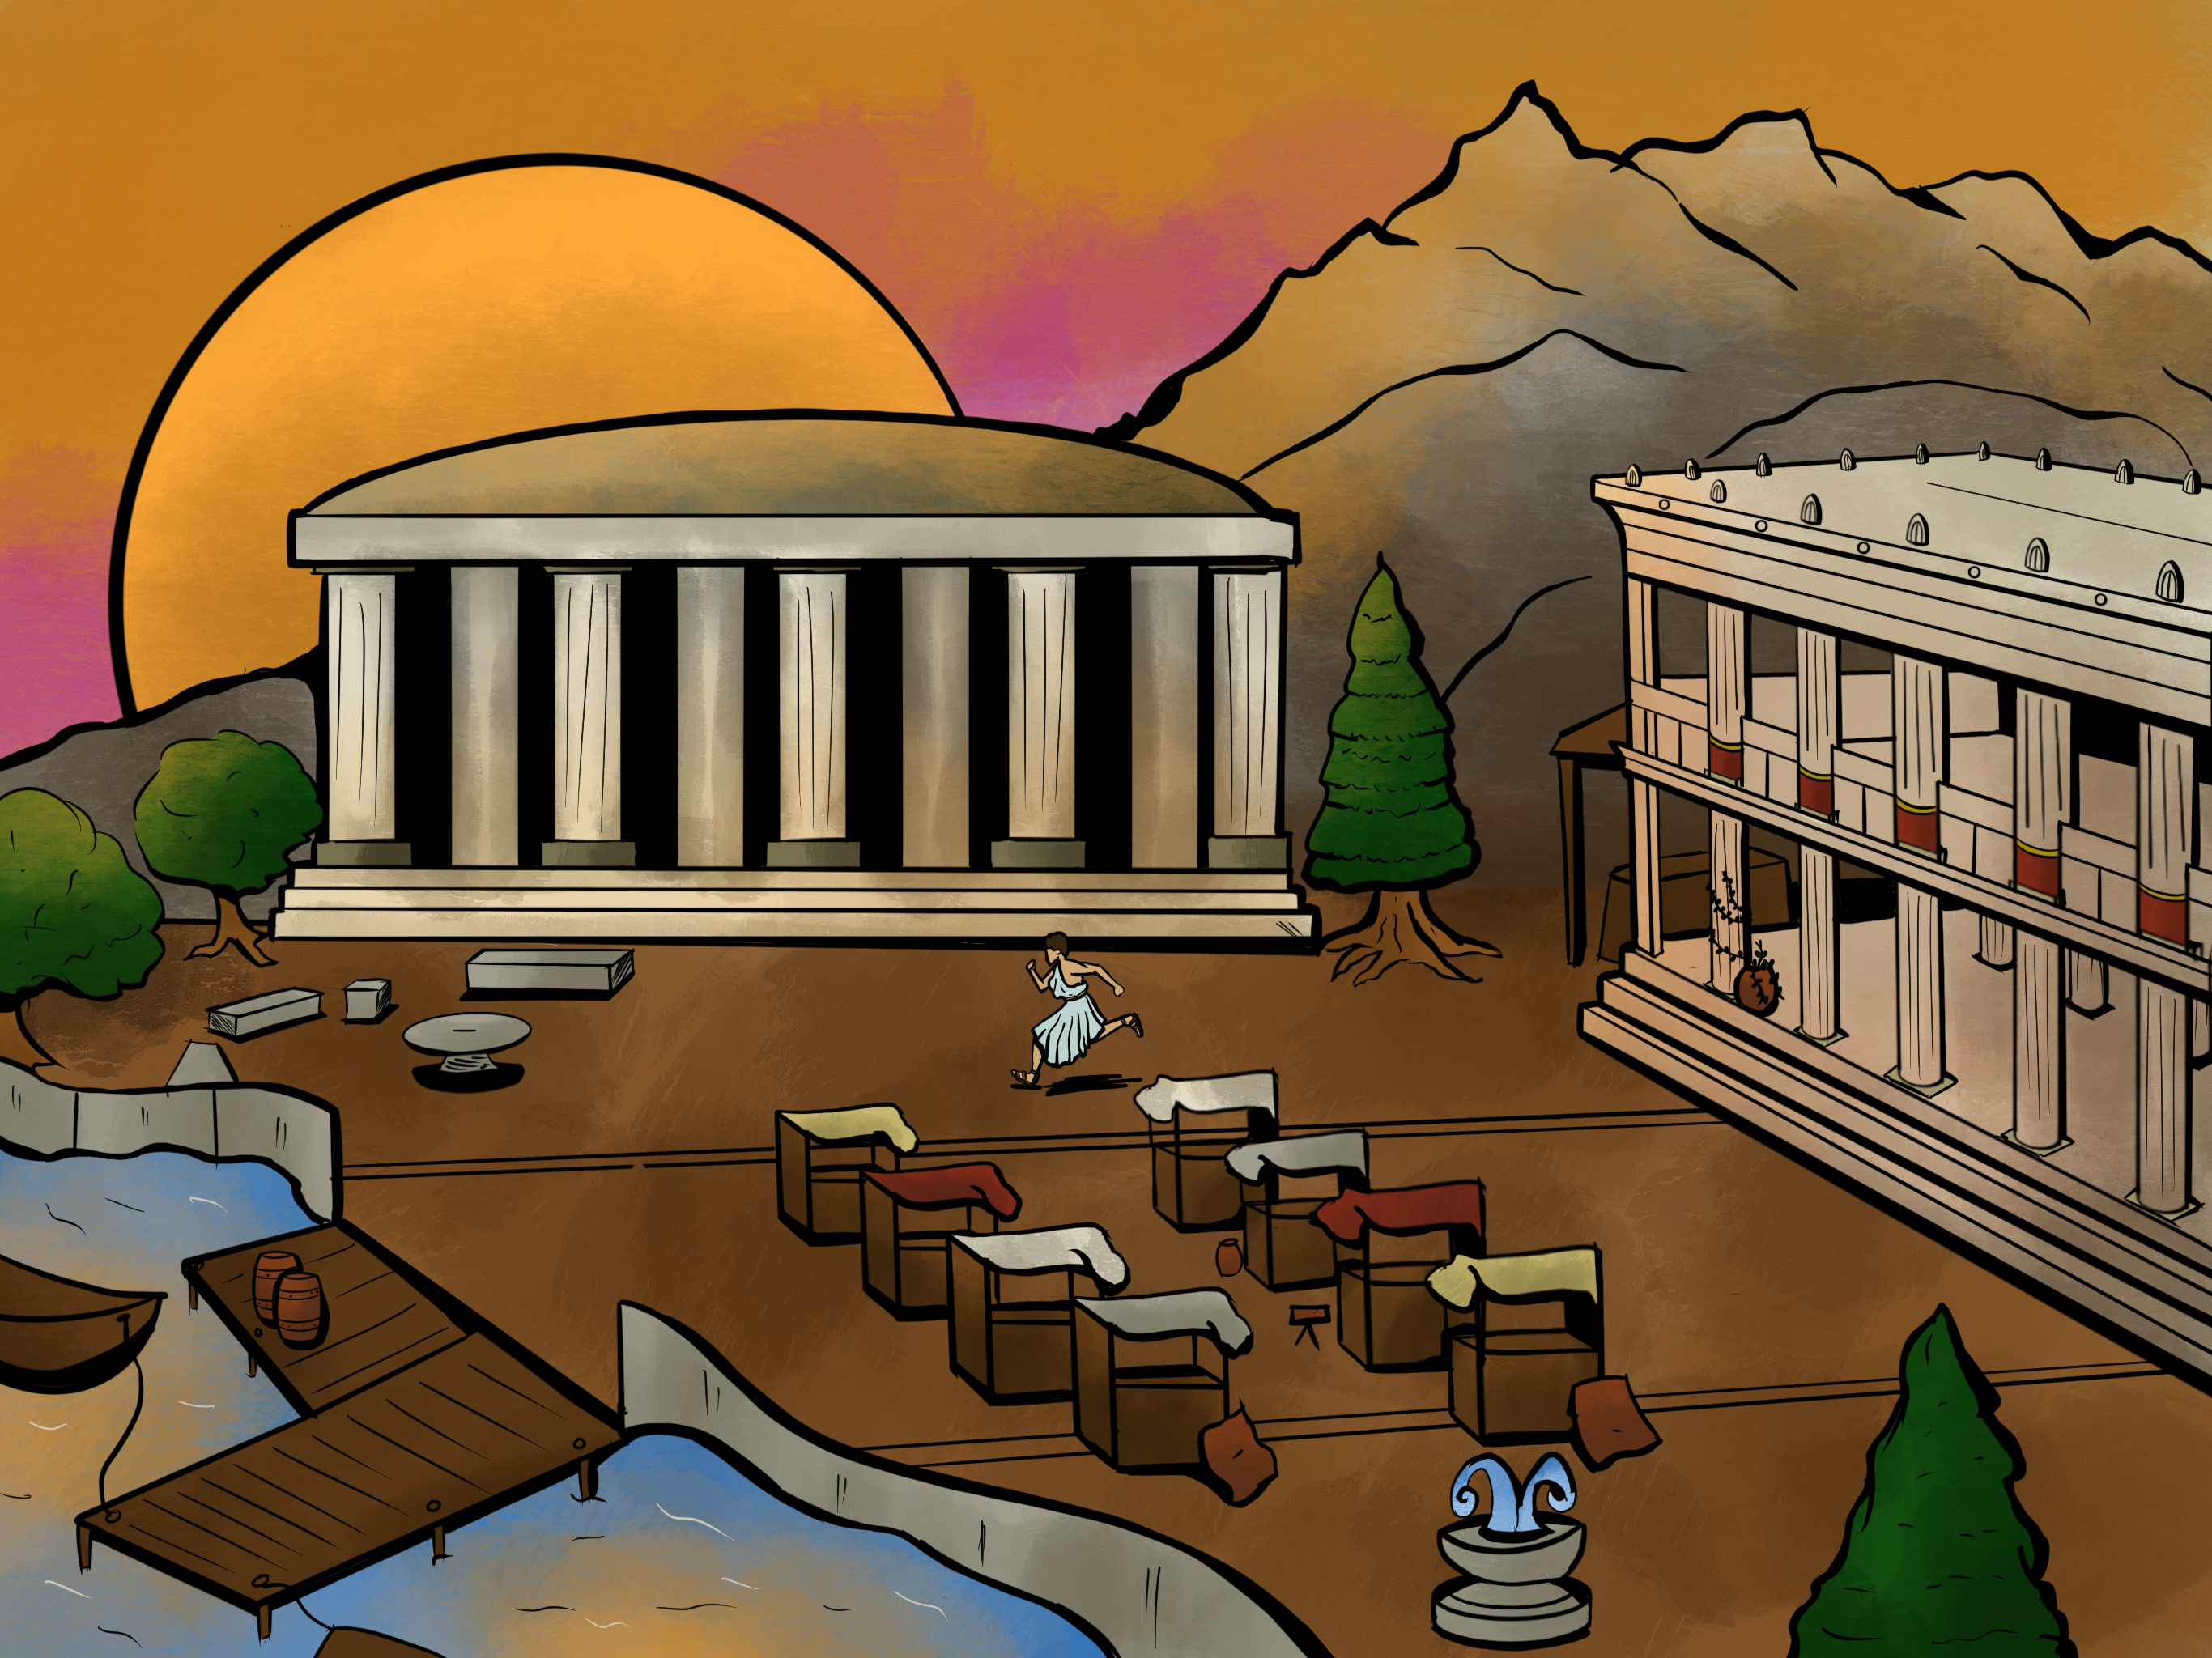 As the sun sets, the player character is seen running across the town in this comic.